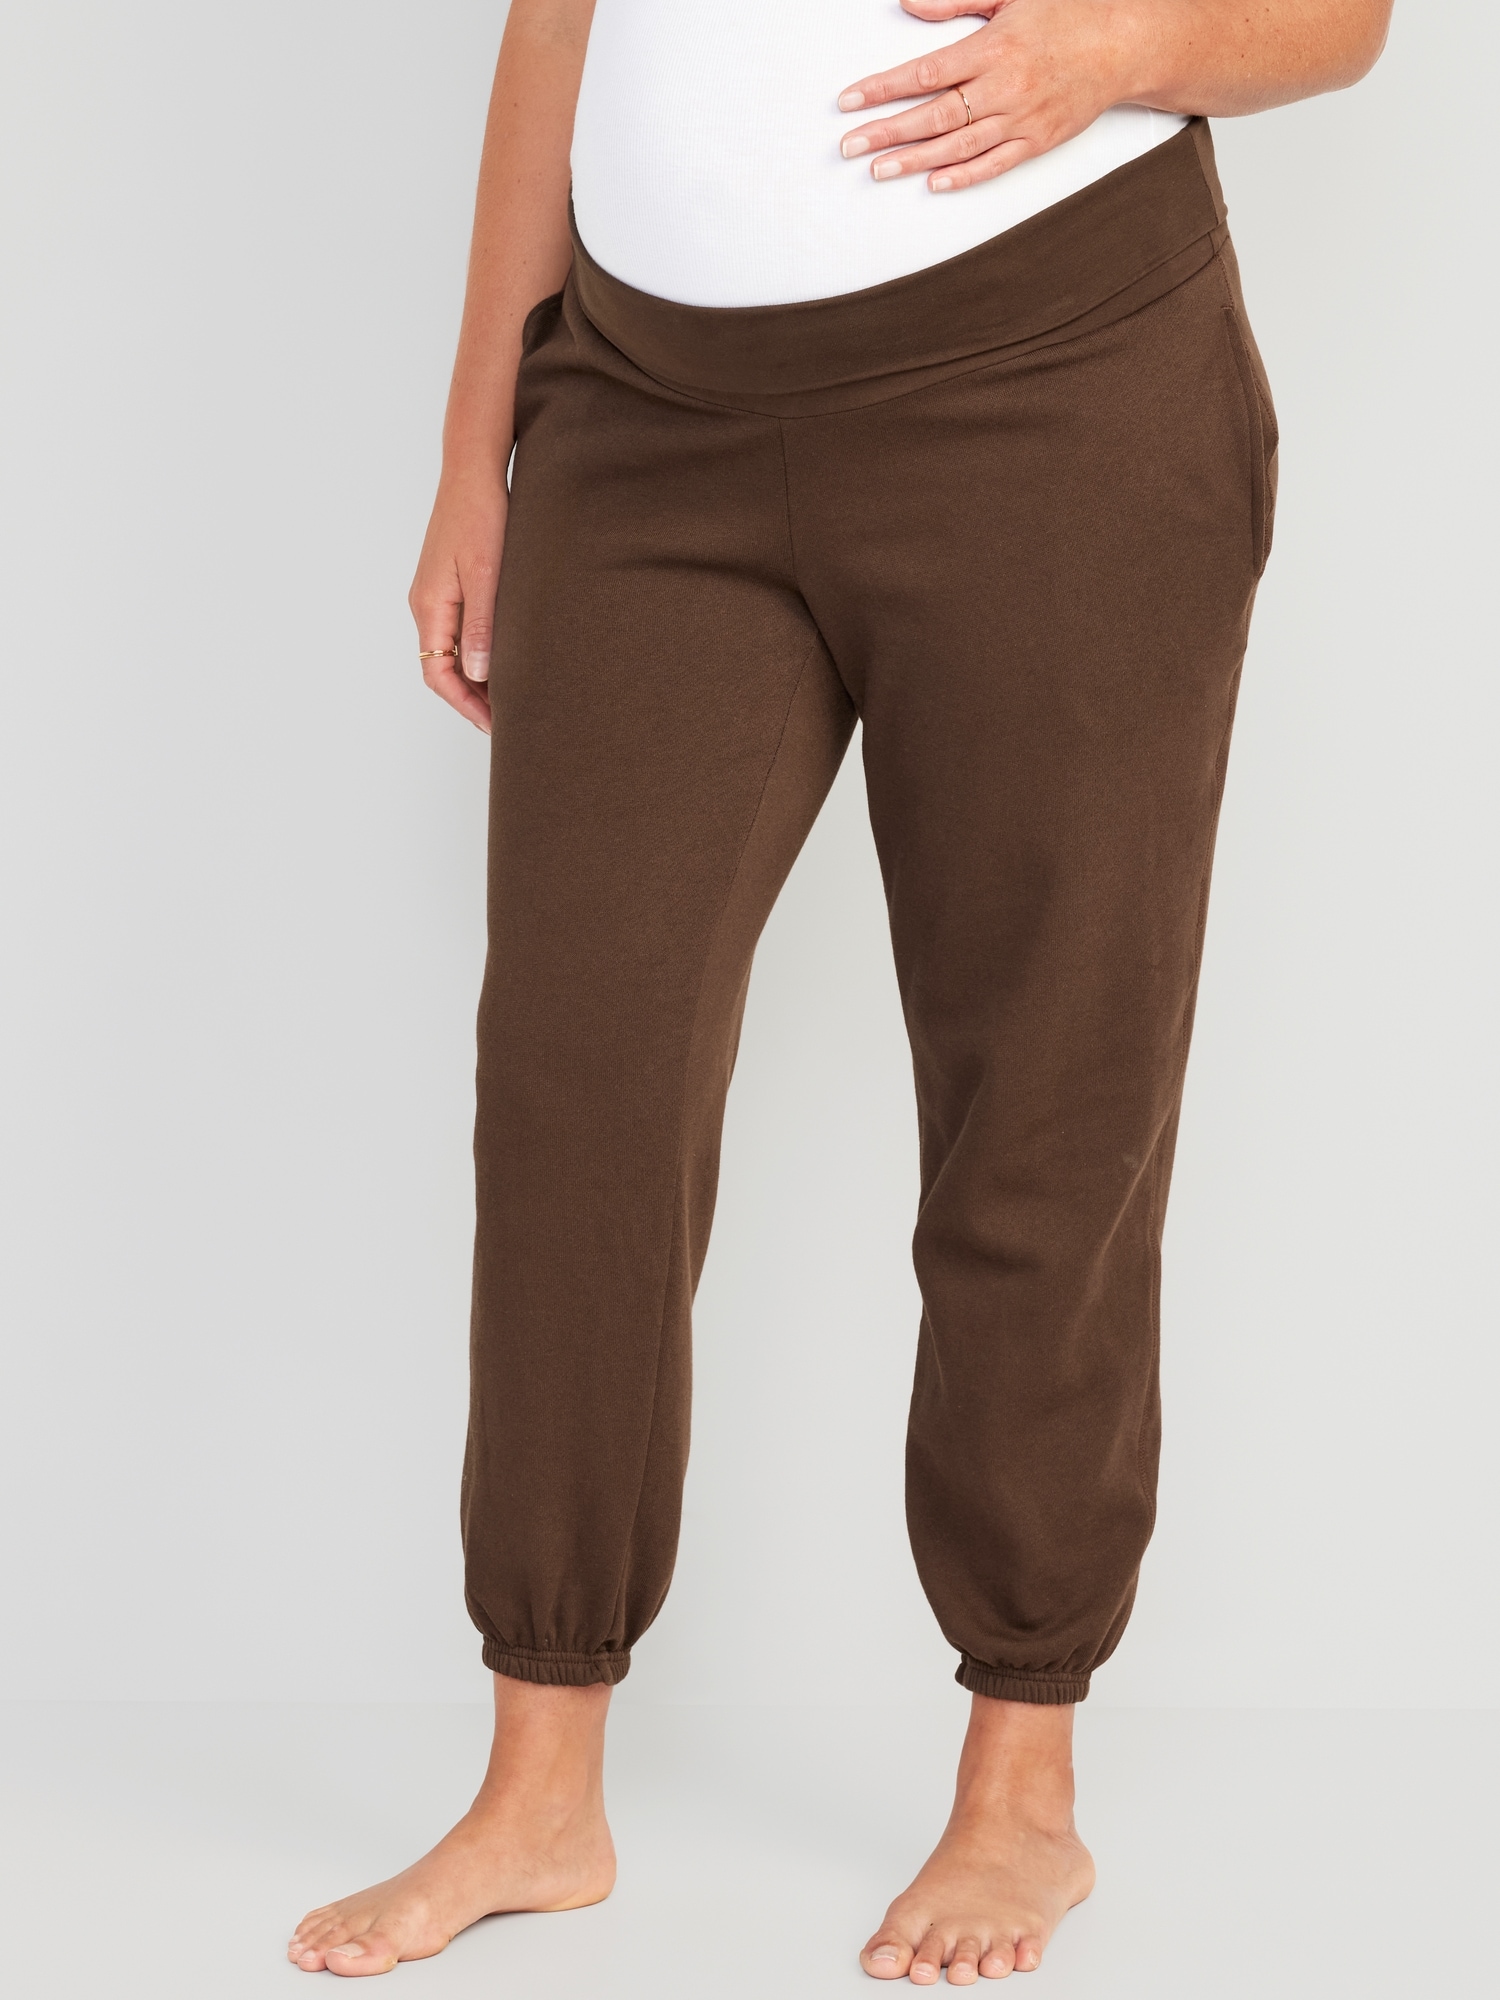 Free People Around the Clock Neutral Taupe Ribbed Jogger Pants Small Tan -  $35 (56% Off Retail) - From Alana